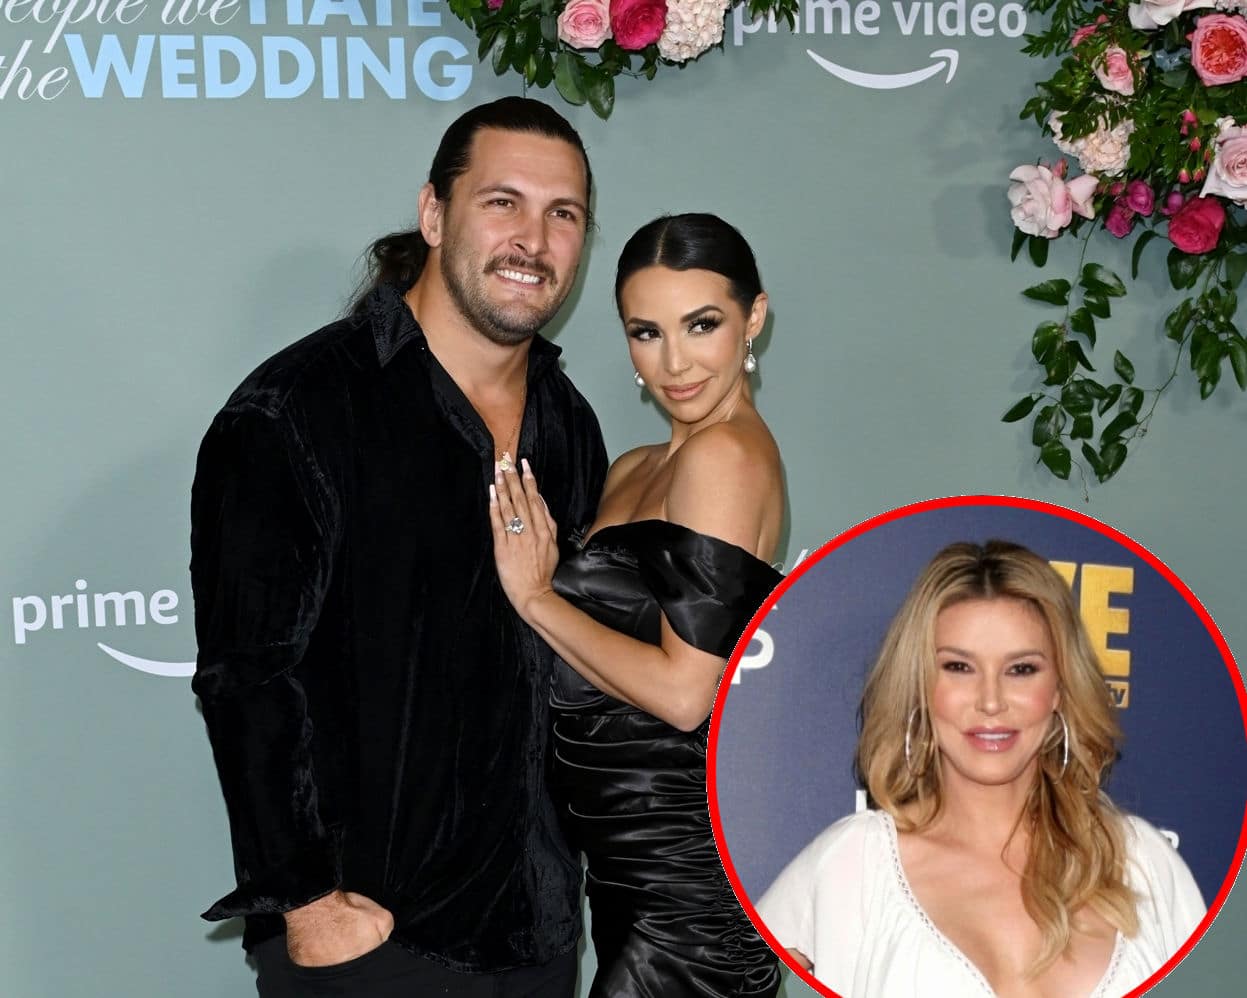 Scheana Shay Reacts to Brandi Glanville's RHUGT Drama, Shares Update on Baby No.2 as Brock Explains Vanderpump Rules Season 10 Premiere Absence